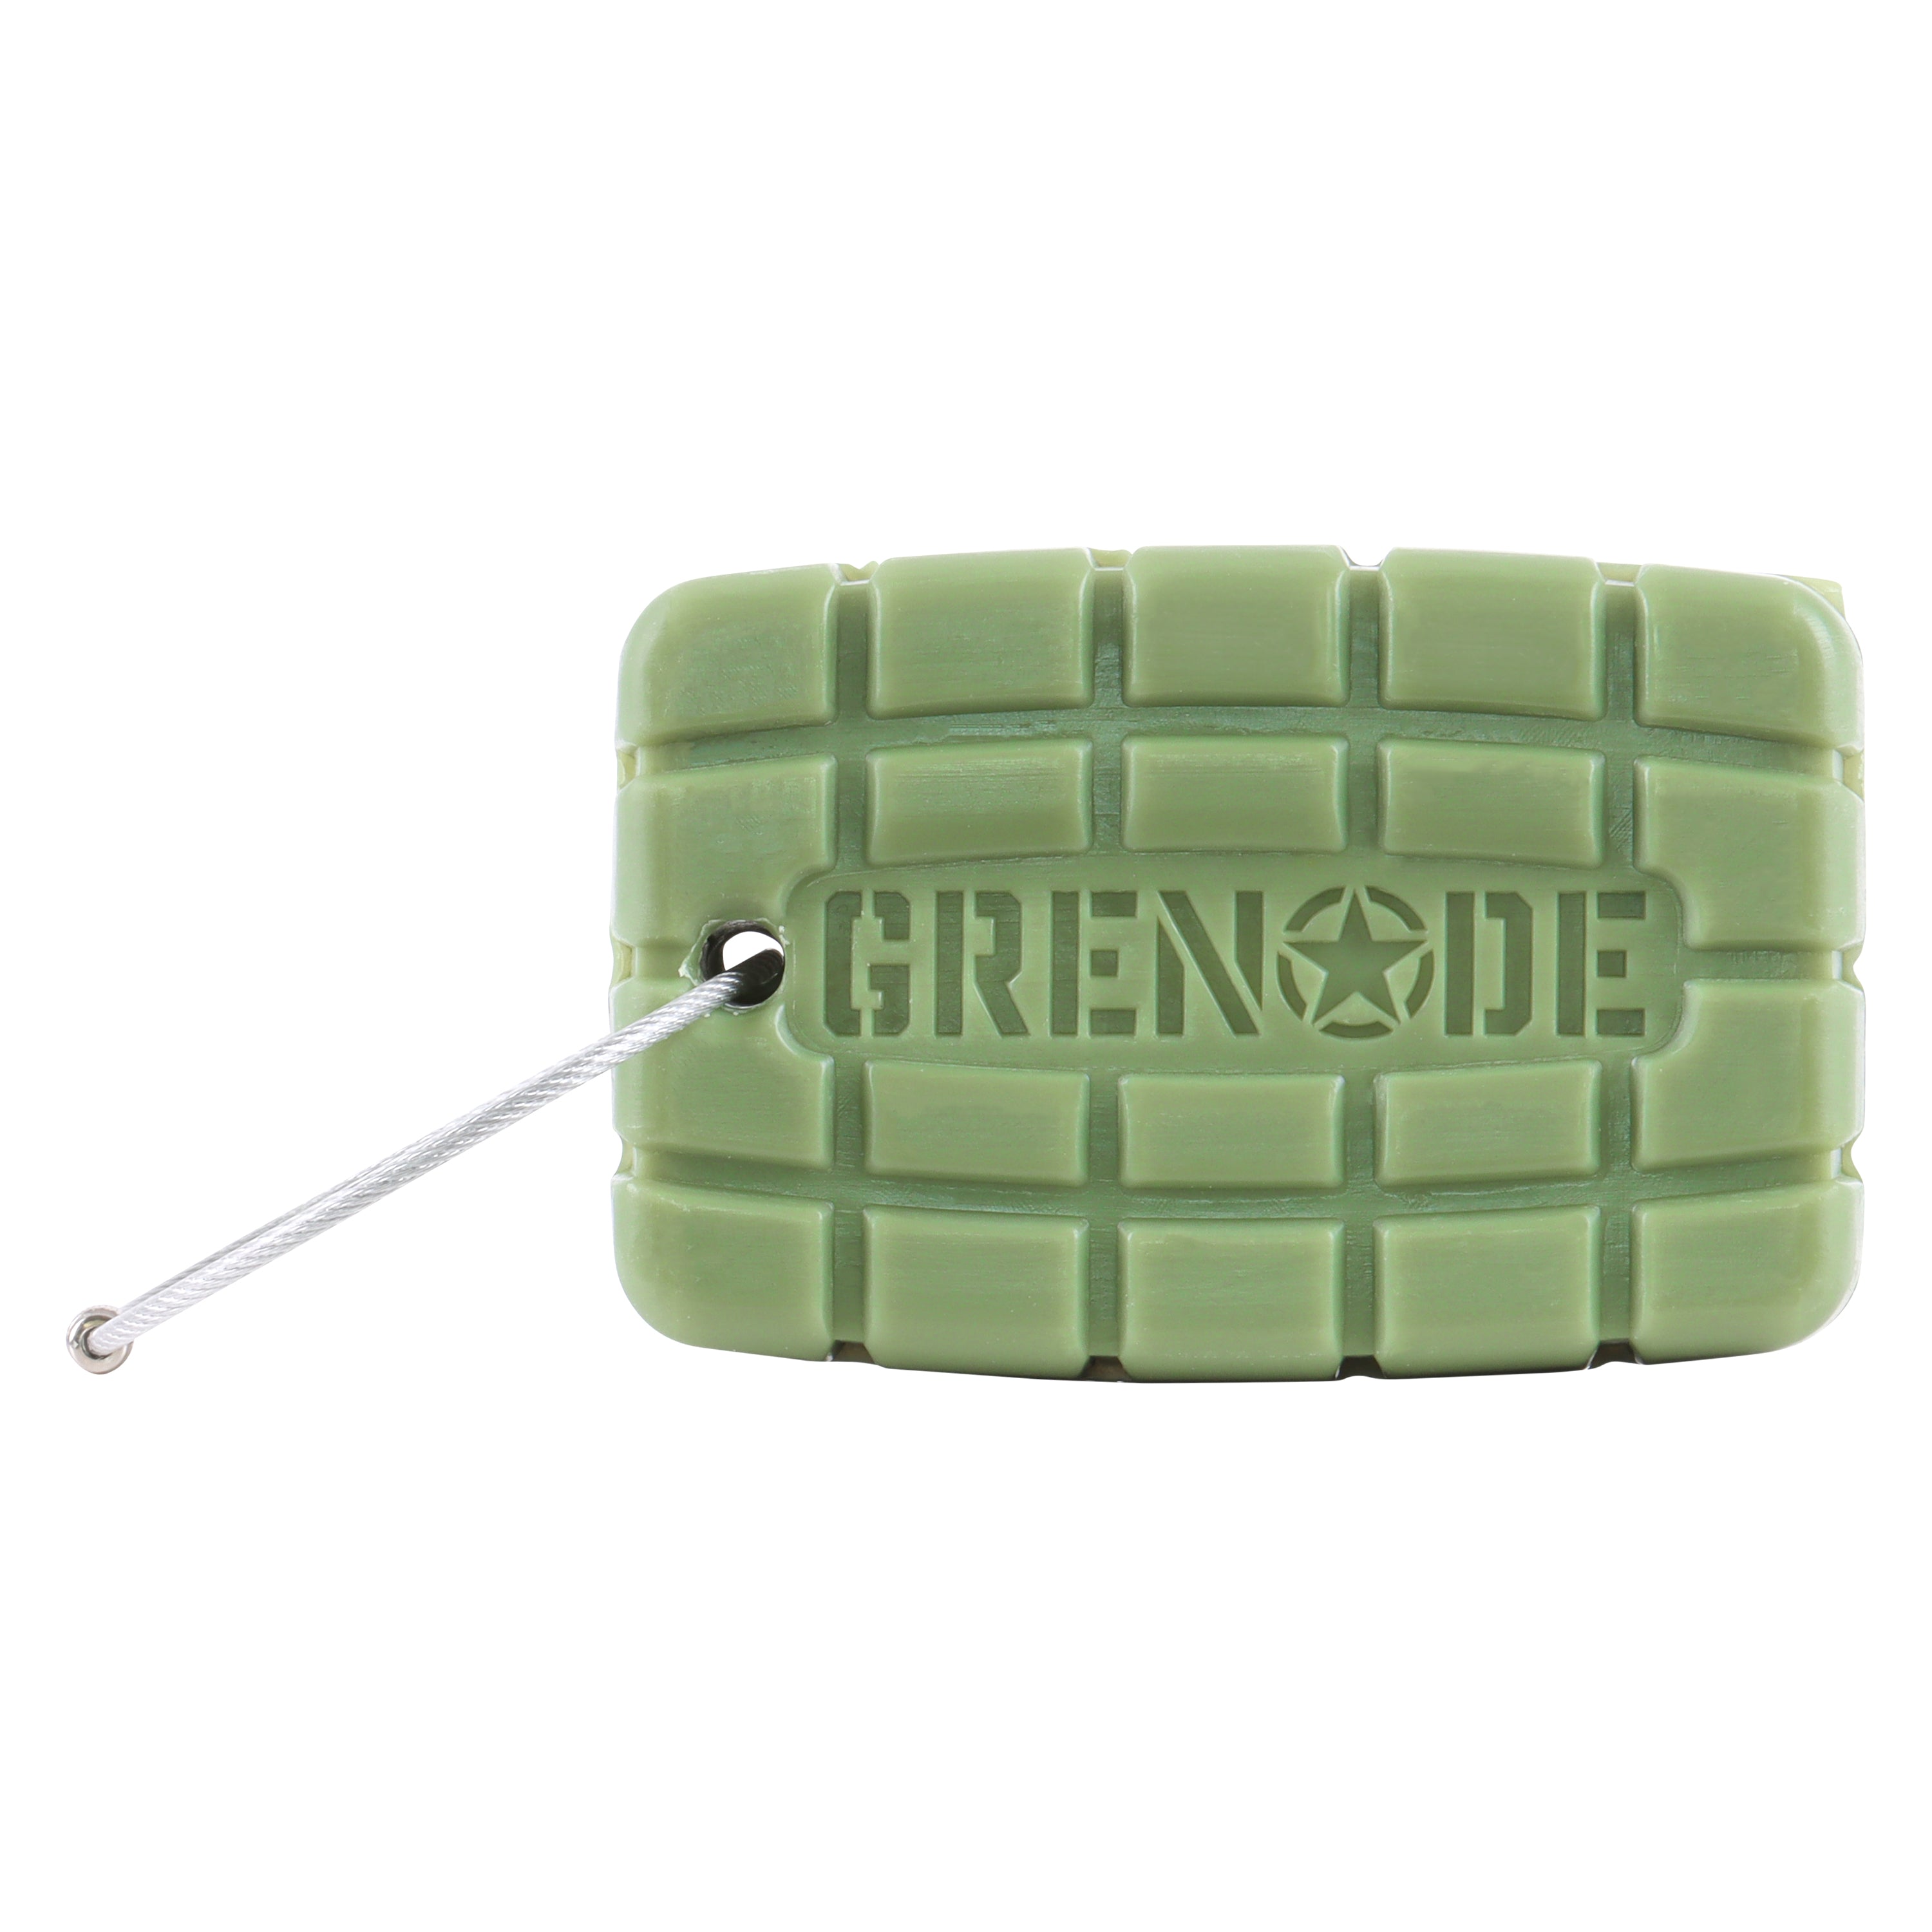 GRENADE SOAP CO. X VARIETY 4-PACK